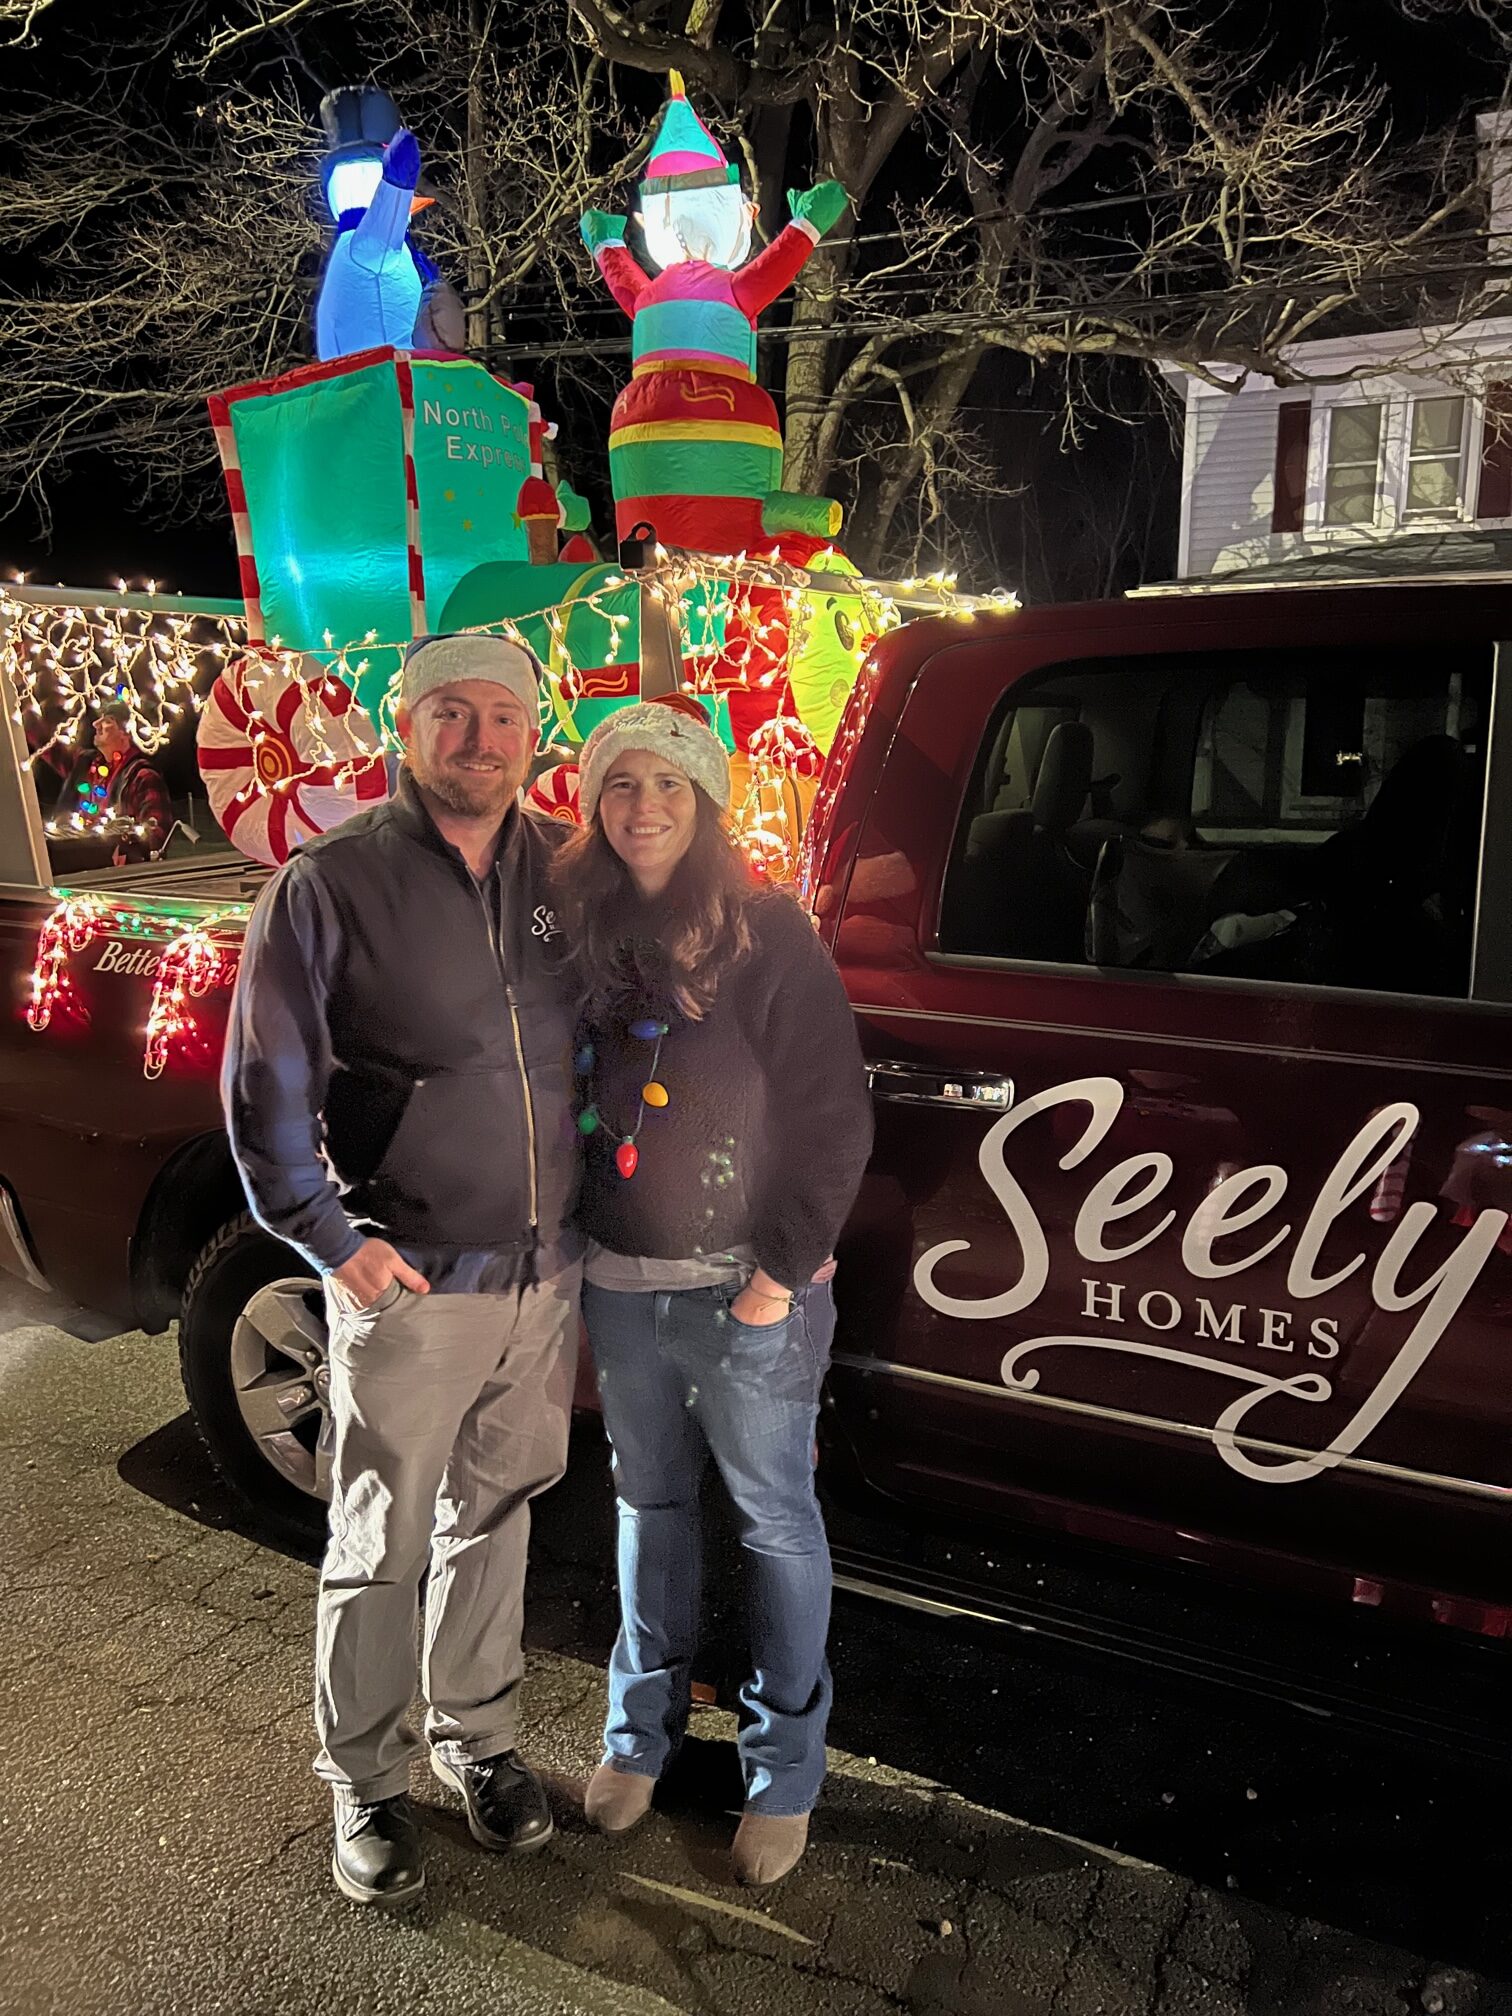 Seely Homes at Christmas Parade